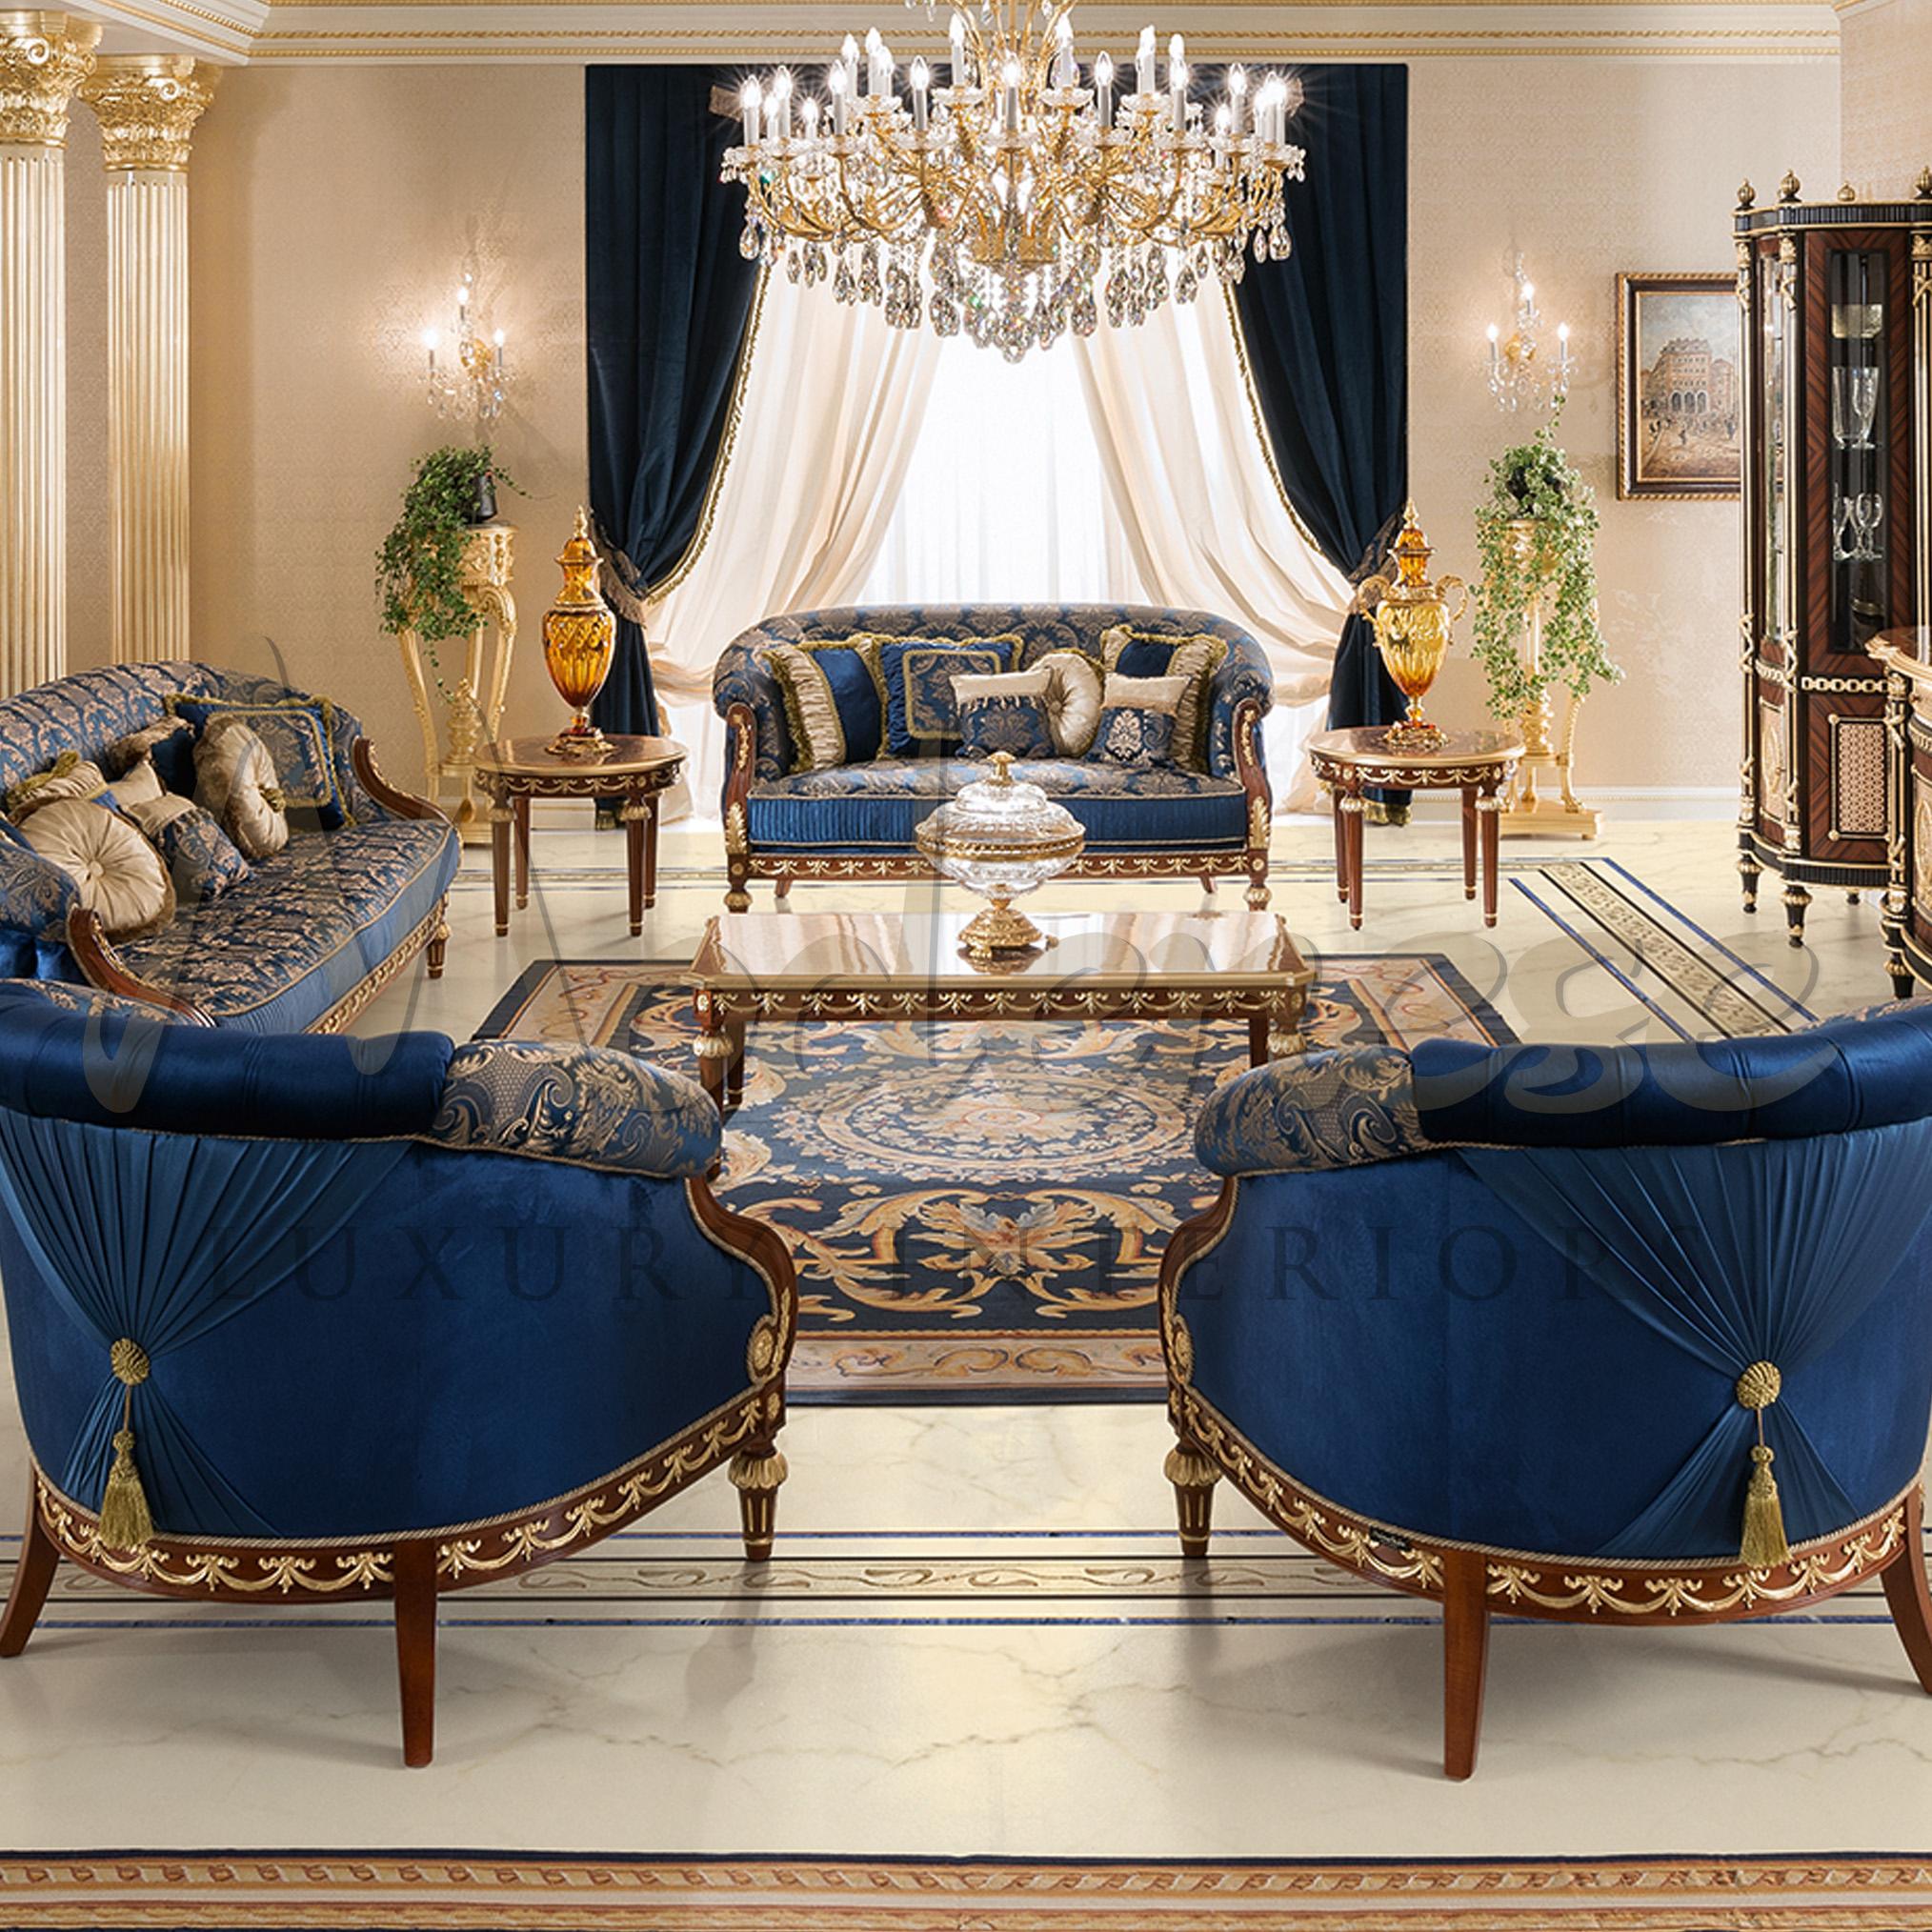 royal blue and gold furniture